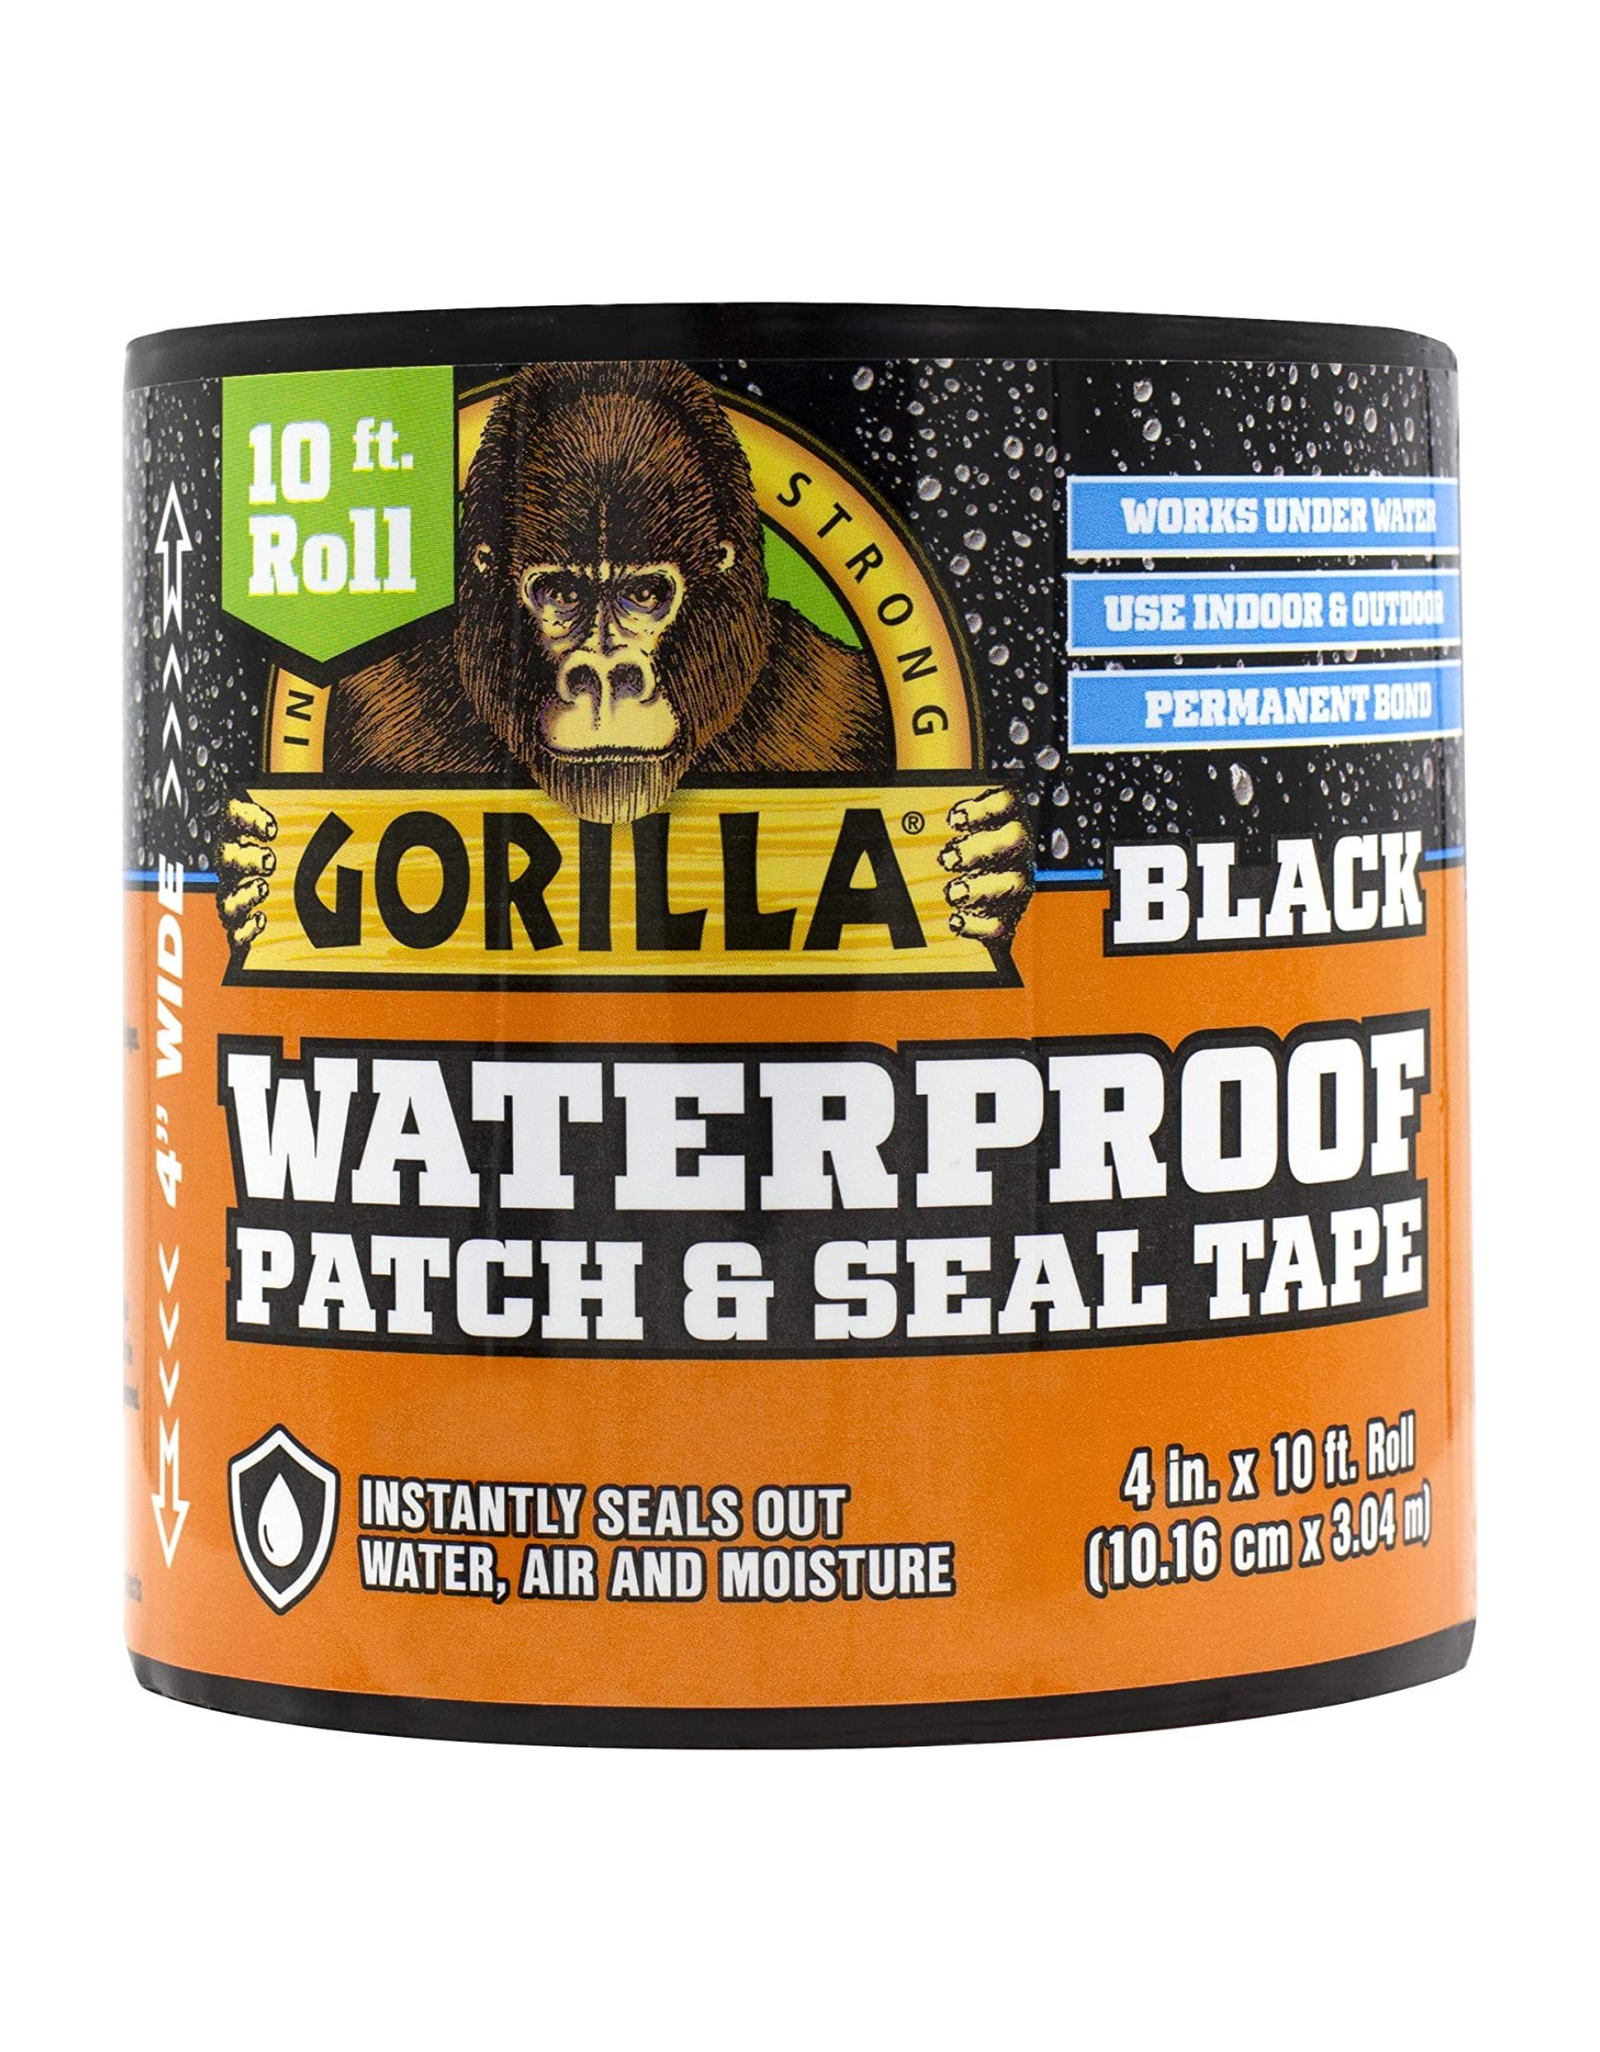 Gorilla Waterproof Patch & Seal Tape 4 Inch x 10 ft., Black, (Pack of 1)